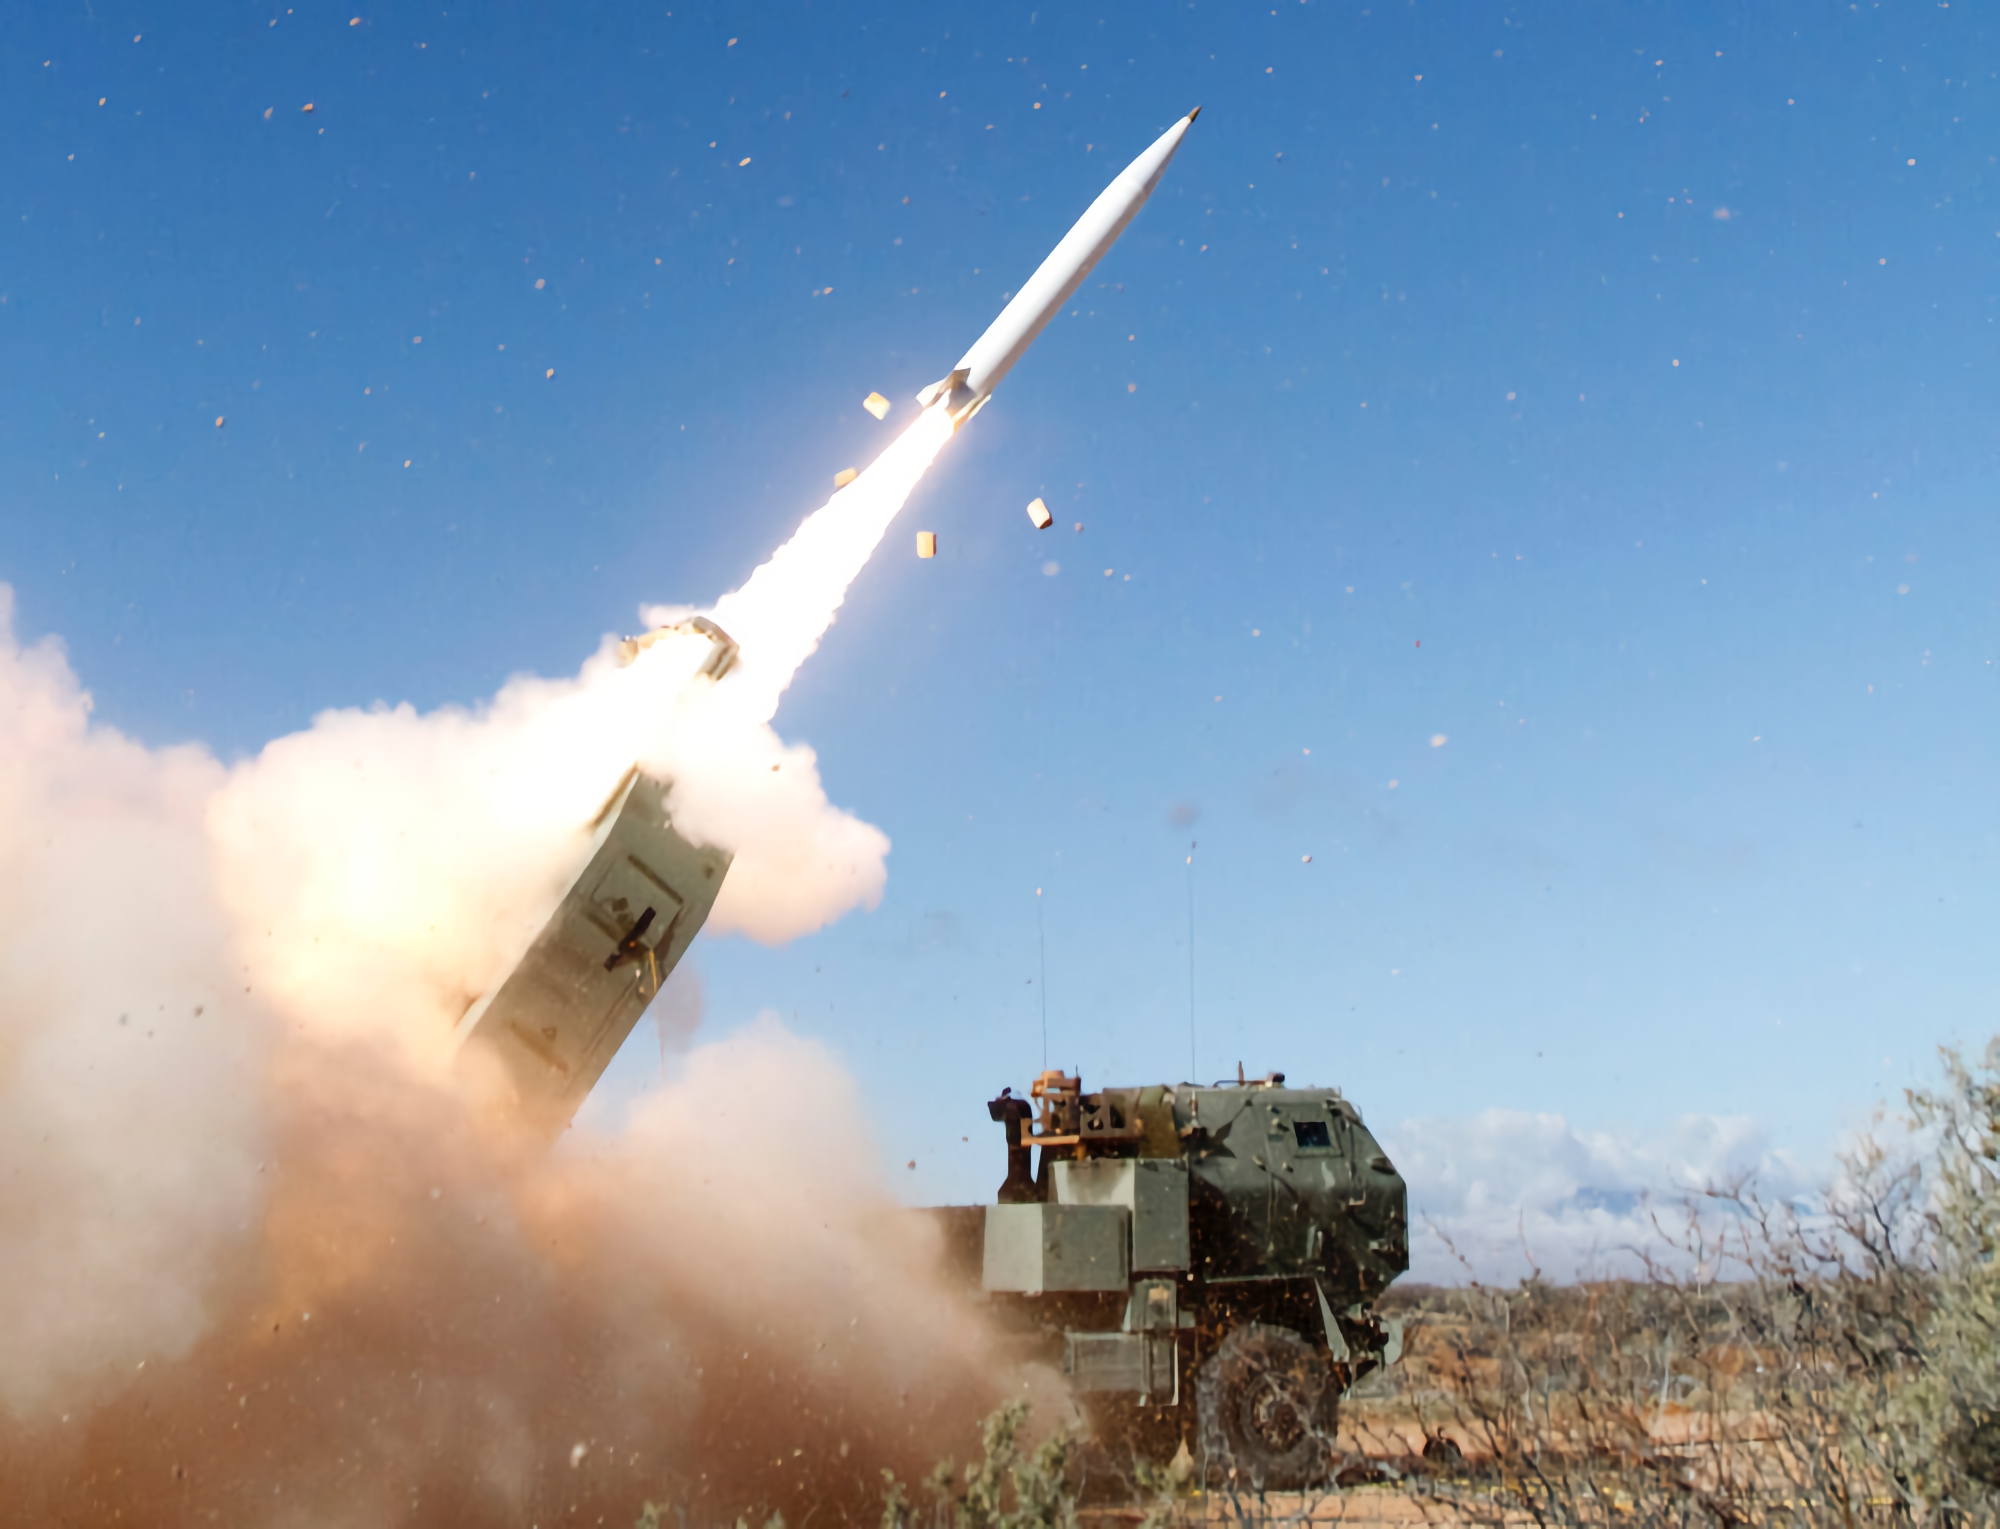 ATACMS Replacement: The United States ordered from Lockheed Martin new PrSM missiles for HIMARS and M270 with a range of up to 650 km